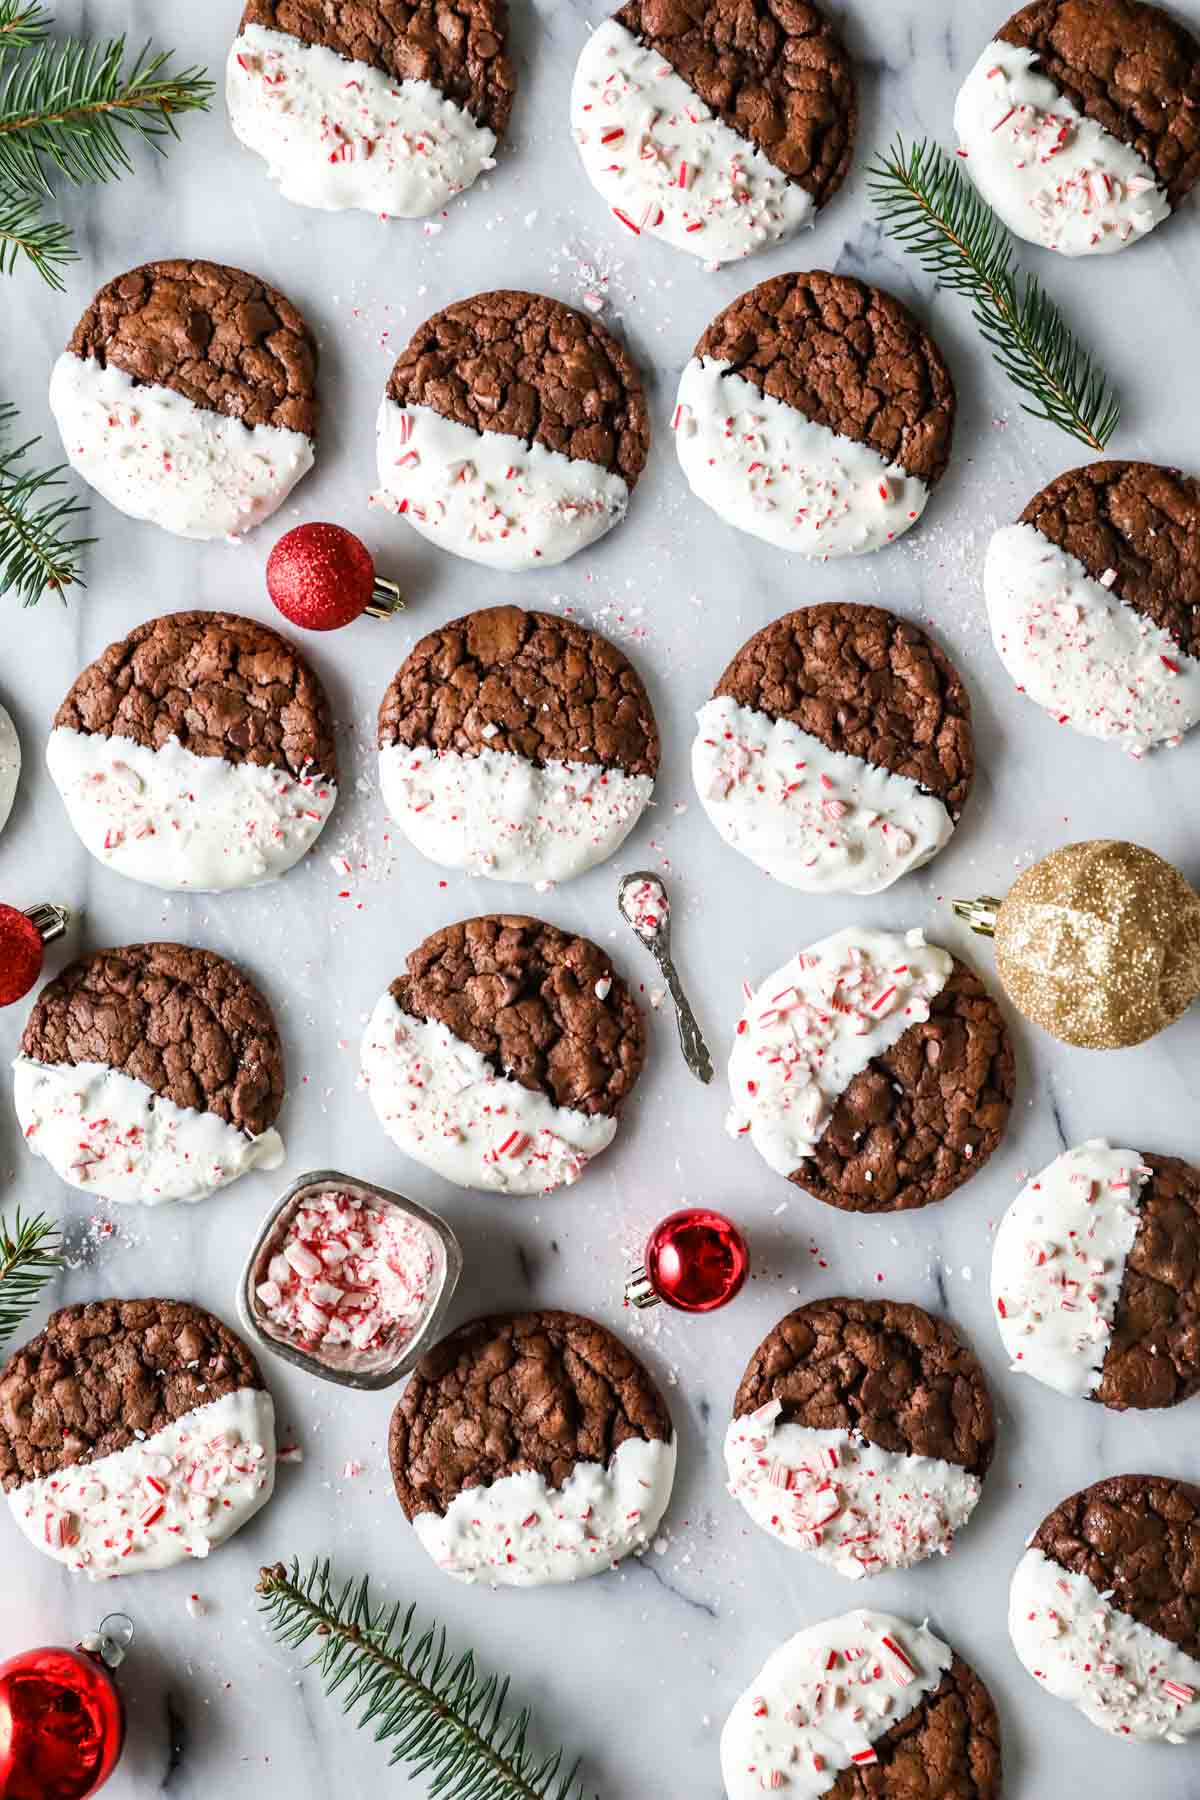 Overhead view of chocolate peppermint bark cookies that have been half dipped in white chocolate and sprinkled with crushed candy canes.